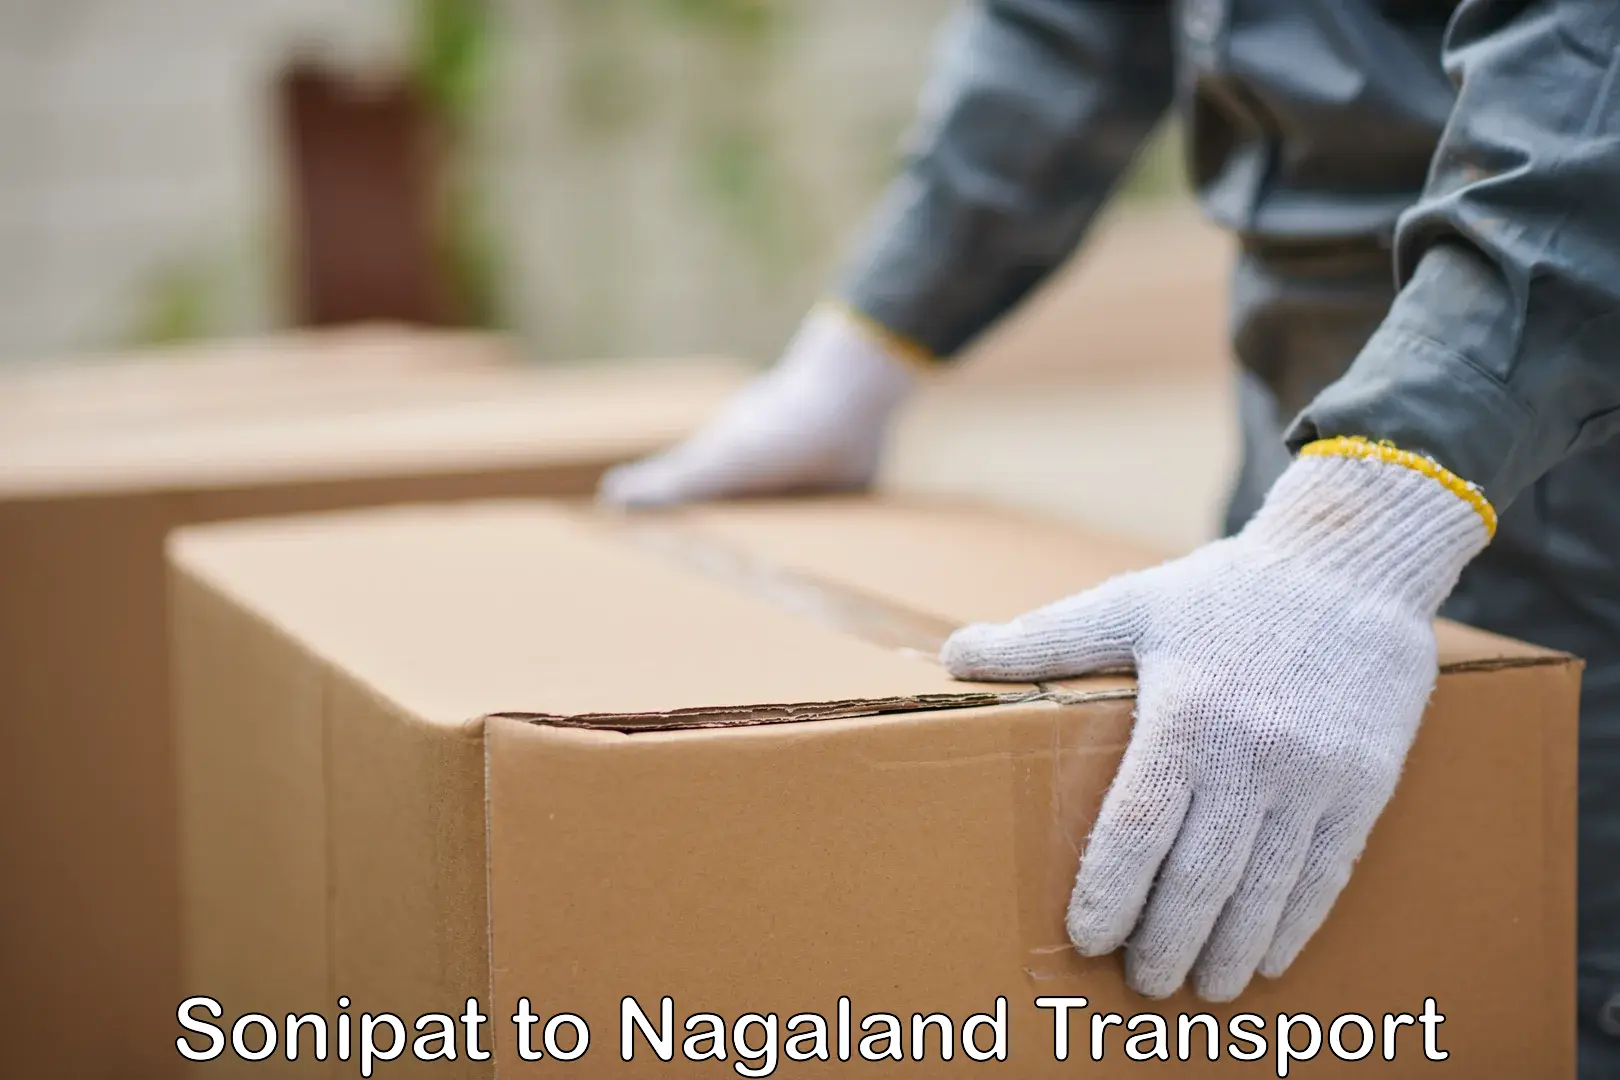 Delivery service Sonipat to Nagaland